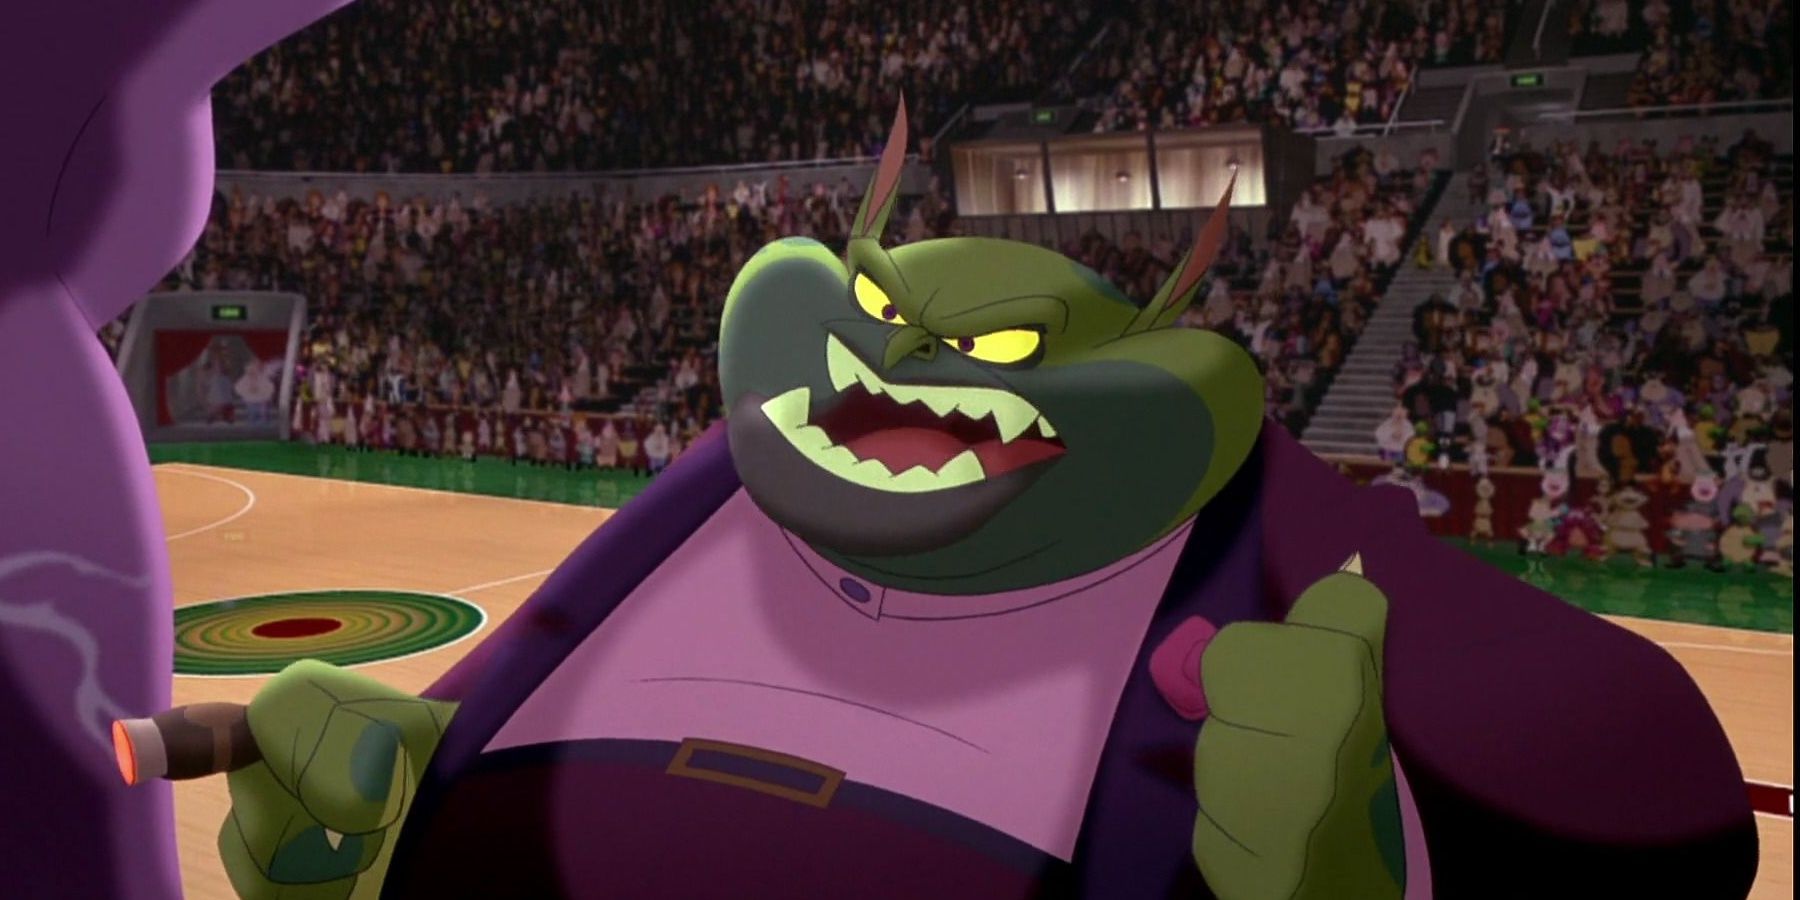 Space Jam: Every Main Character, Ranked By Likability